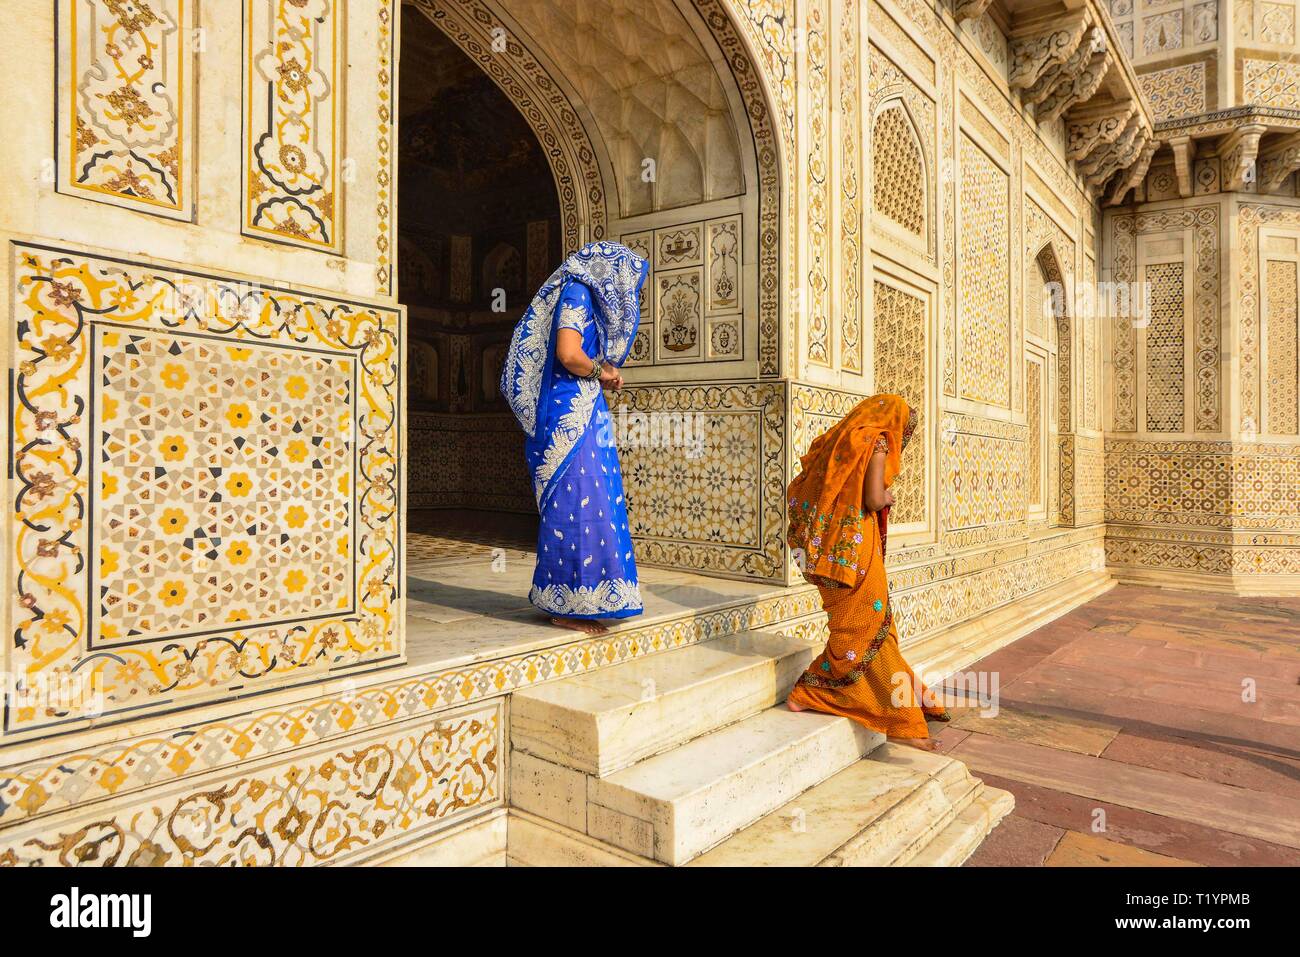 AGRA; INDIA, 12-10-2013: Indian women in colorful saris leaving the mausoleum Itimad ud Daula in Agra, famous for its decoration Stock Photo